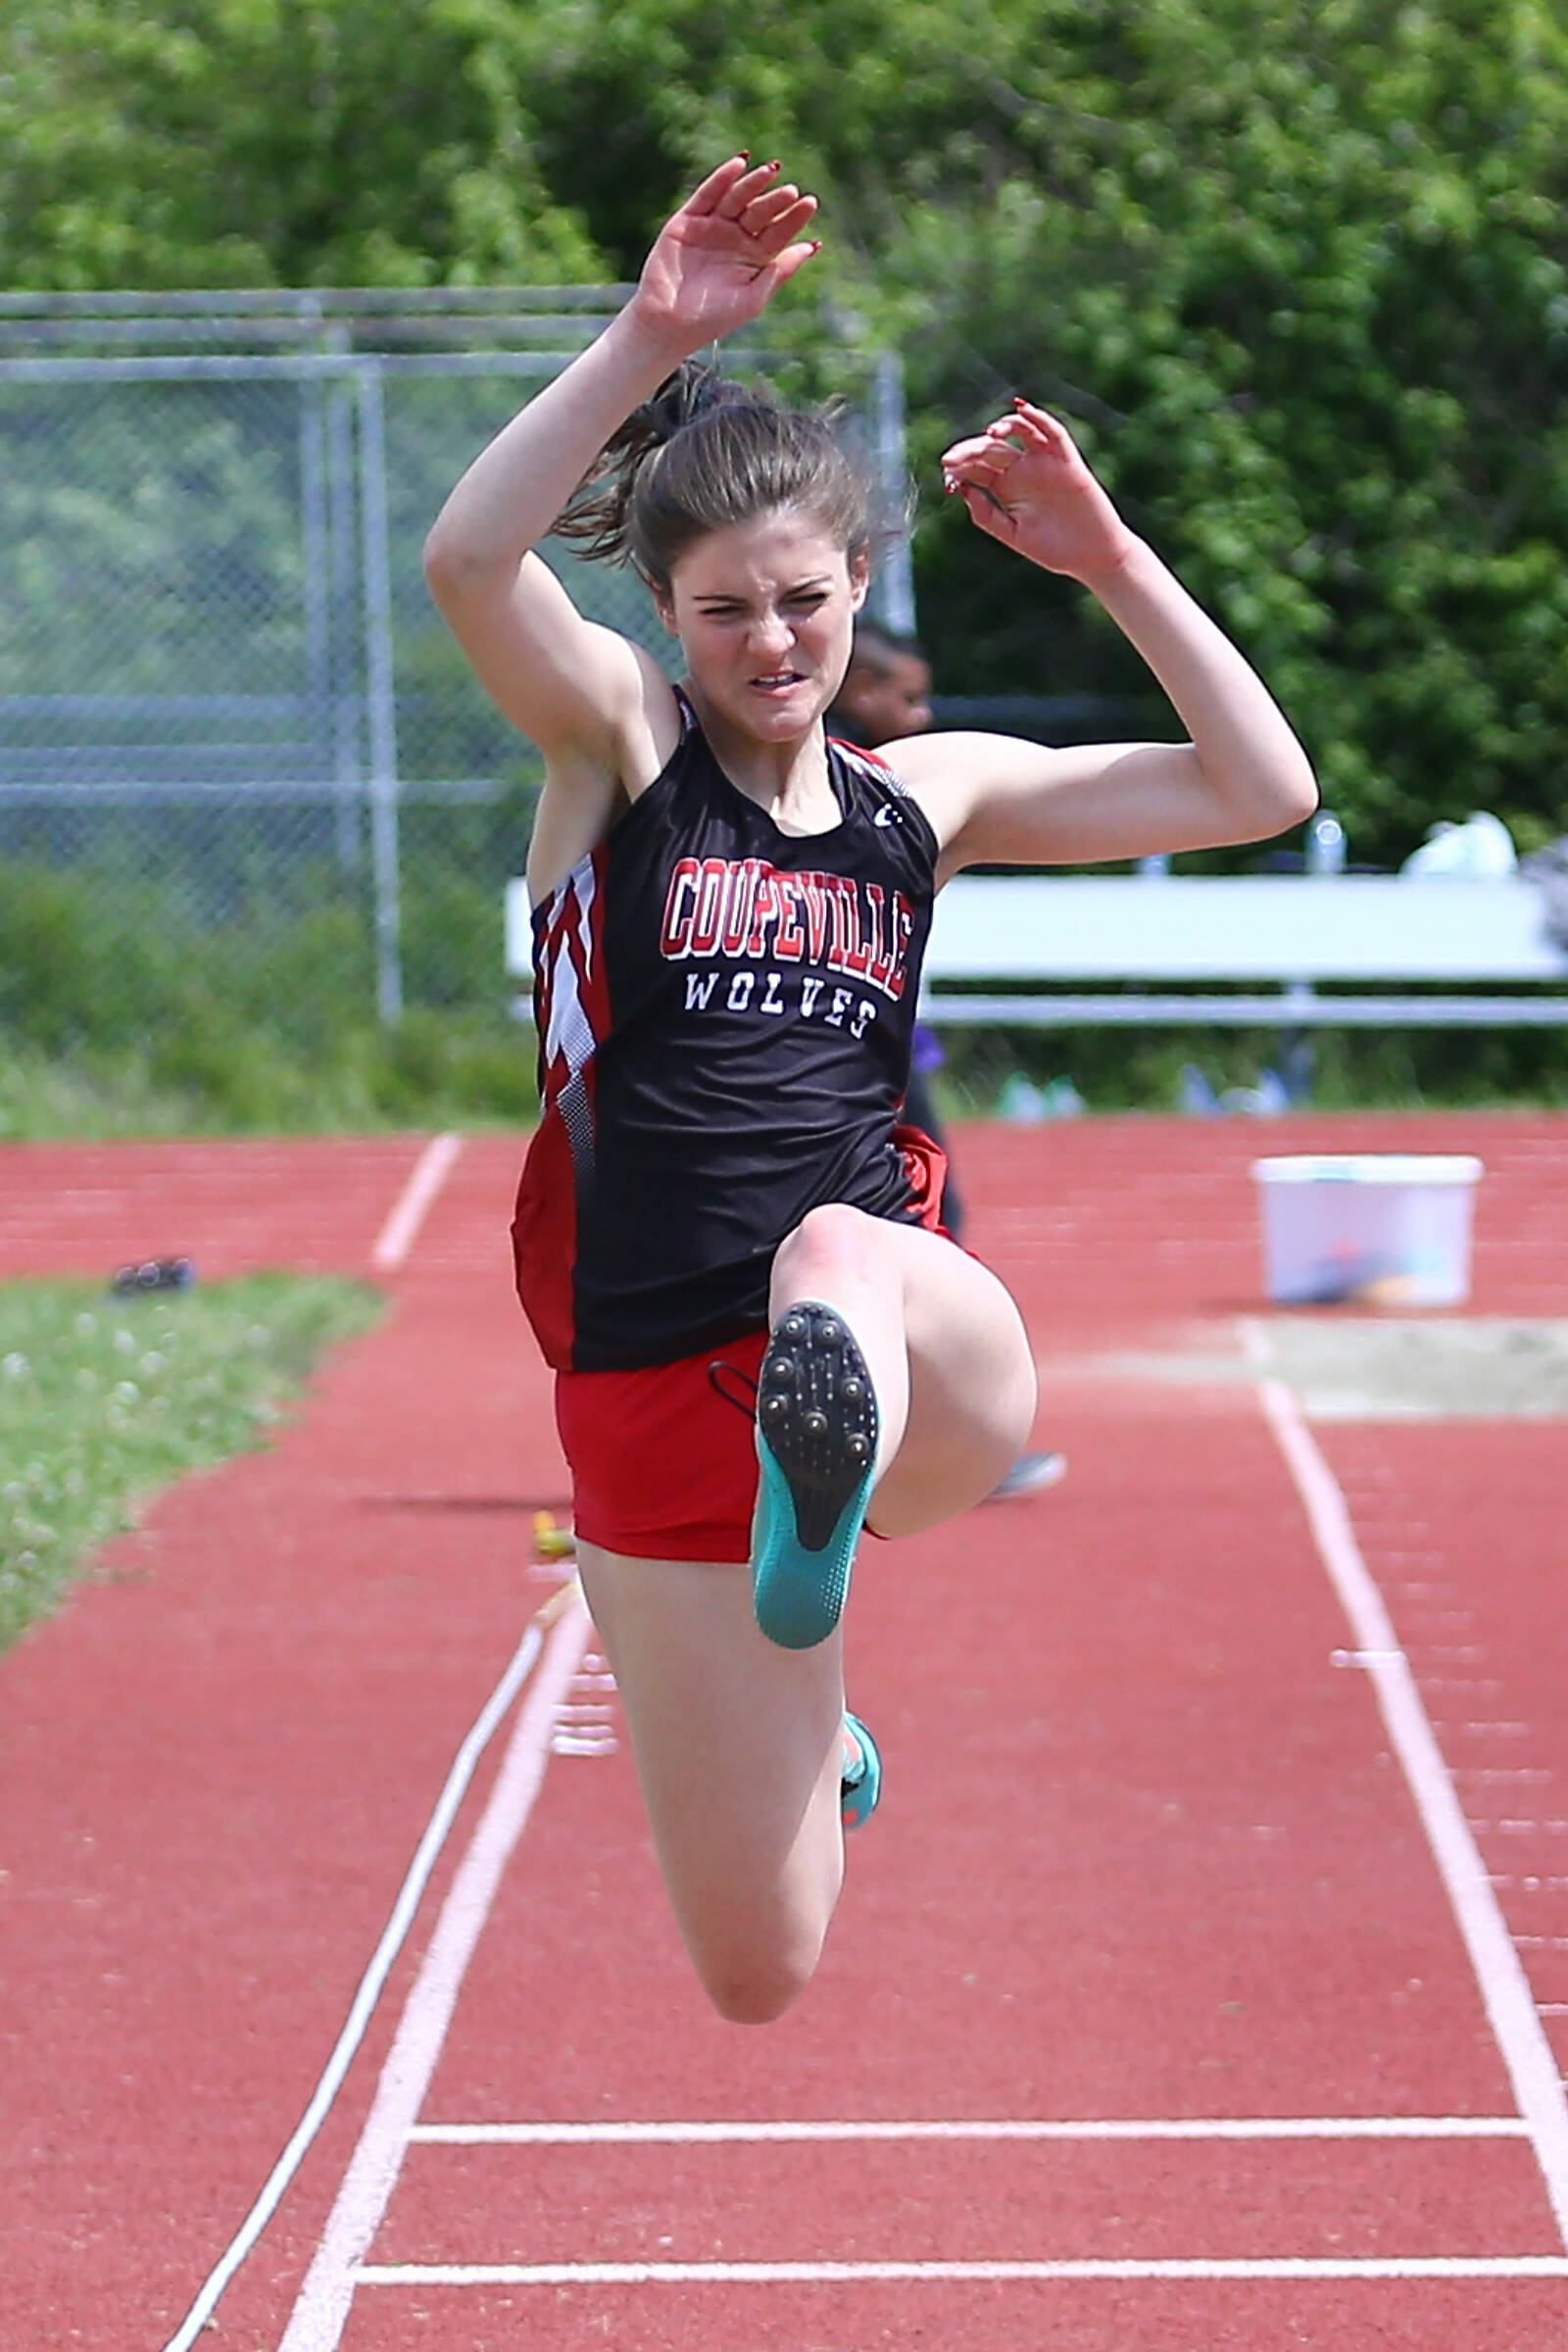 Junior Ryanne Knoblich competes in the long jump. She earned second place in this event with a distance of 15 feet, a personal record for the athlete. She also first place in the high jump with a height of 4 feet, 10 inches. (Photo by John Fisken)